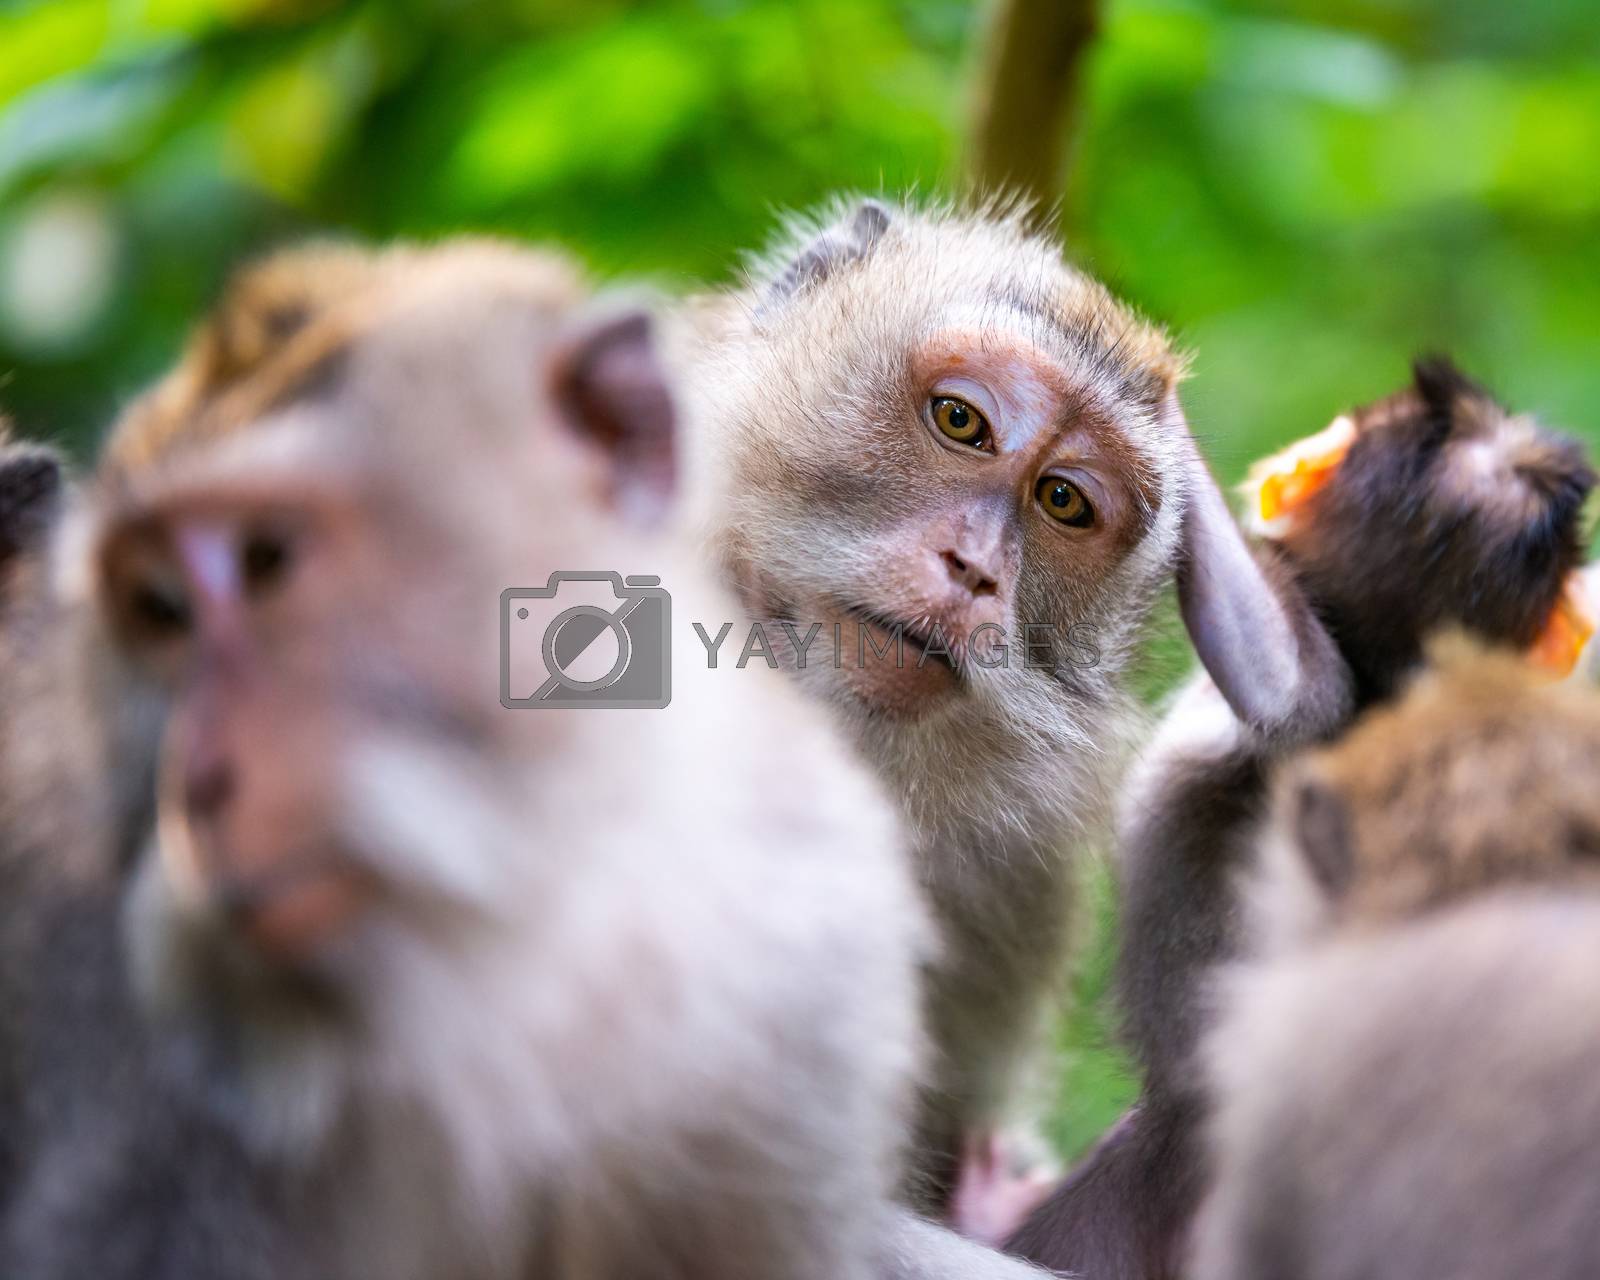 Royalty free image of Macaque monkeys at Ubud Monkey Forest in Bali by dutourdumonde